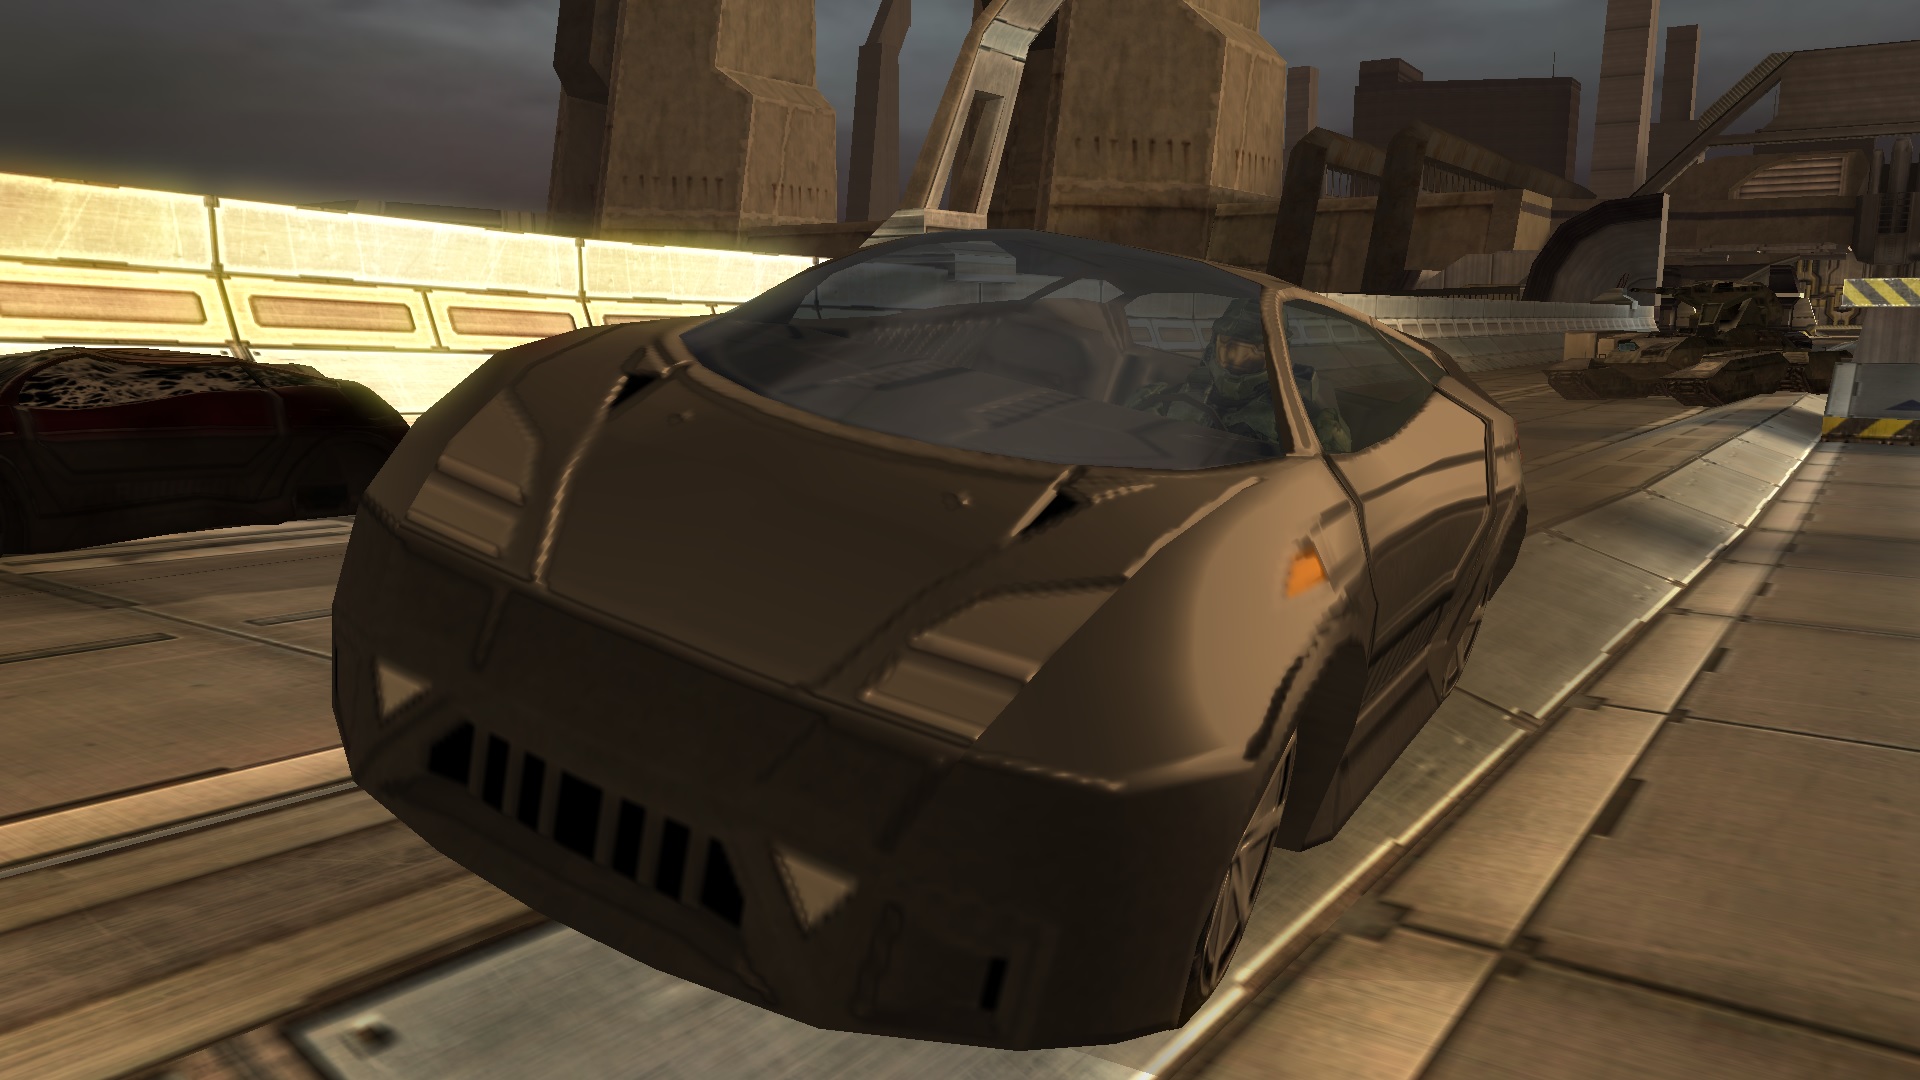 Image of the Master Chief driving the Überchassis in Halo 2